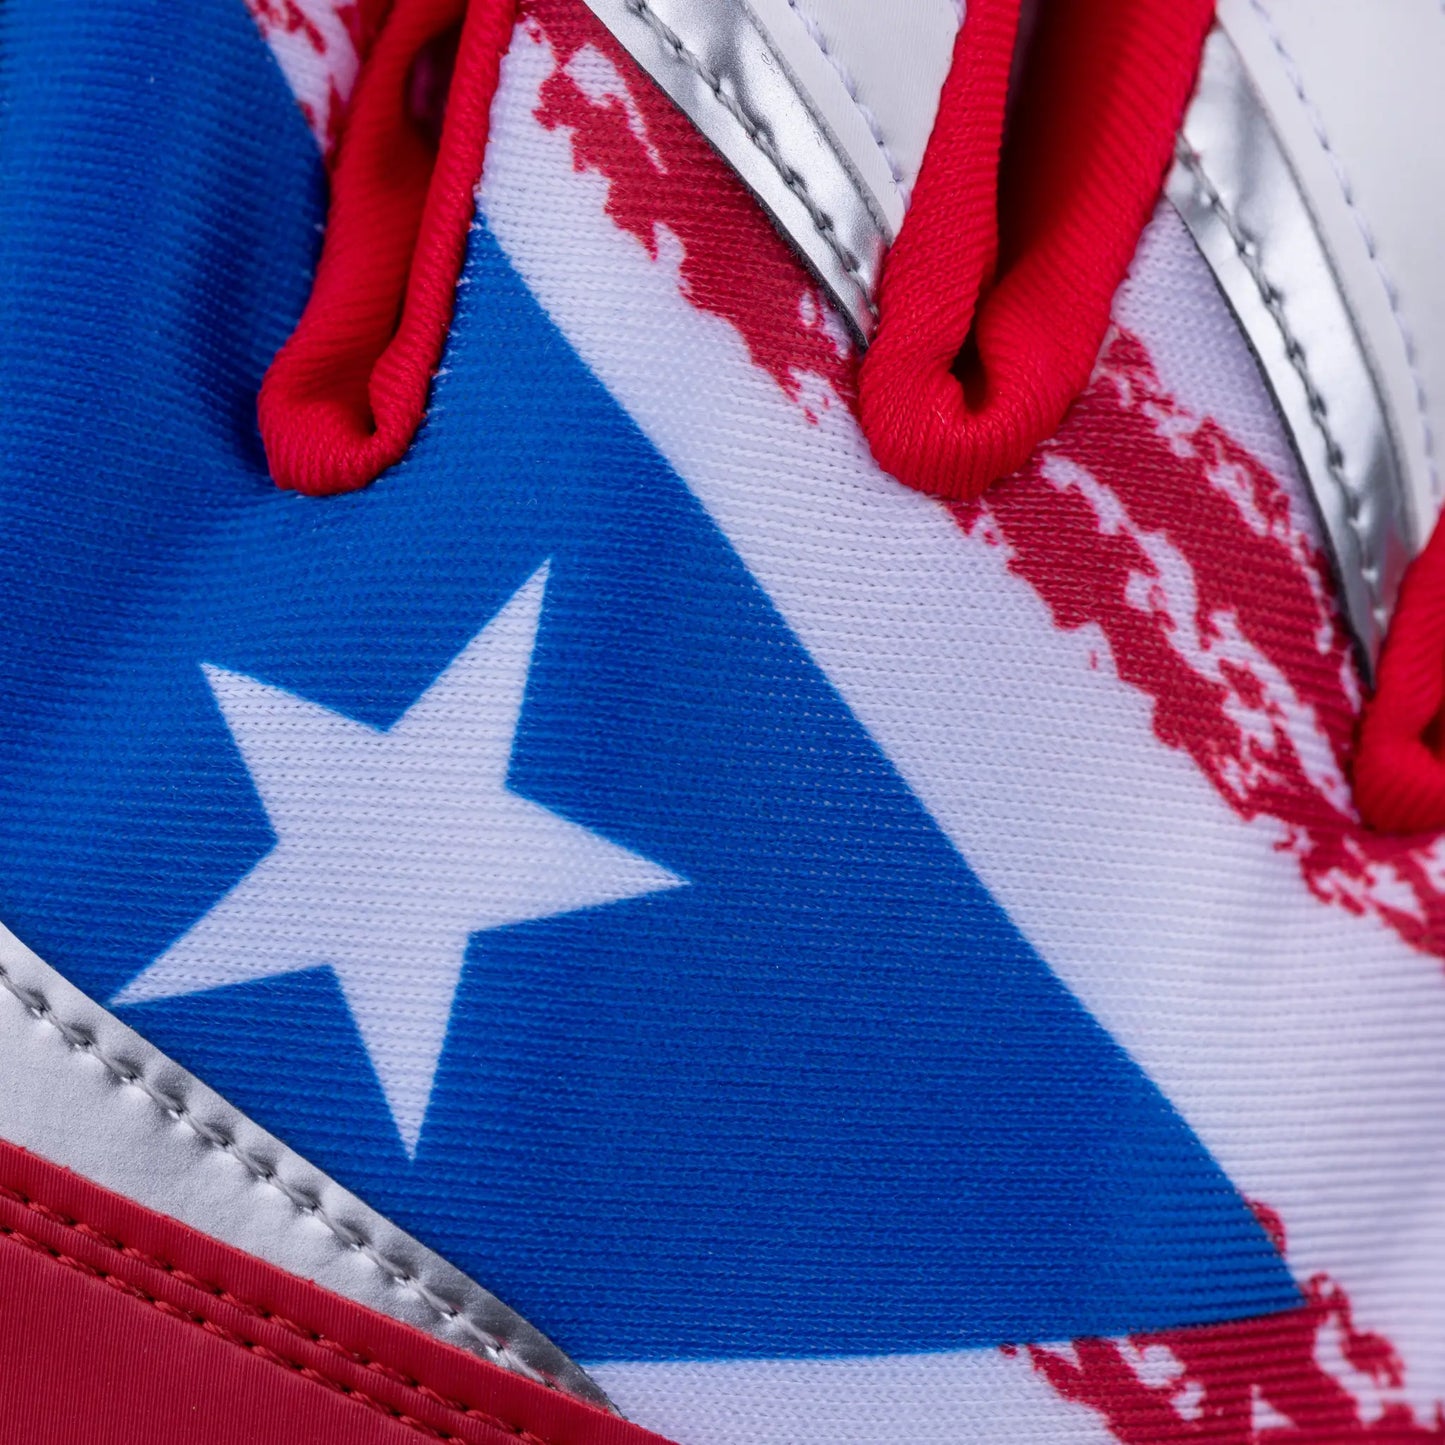 Macro detail showcasing the star of the Puerto Rican flag on Tater Baseball batting gloves, highlighted by the rich blue background and red pattern, capturing the essence of the flag's design.